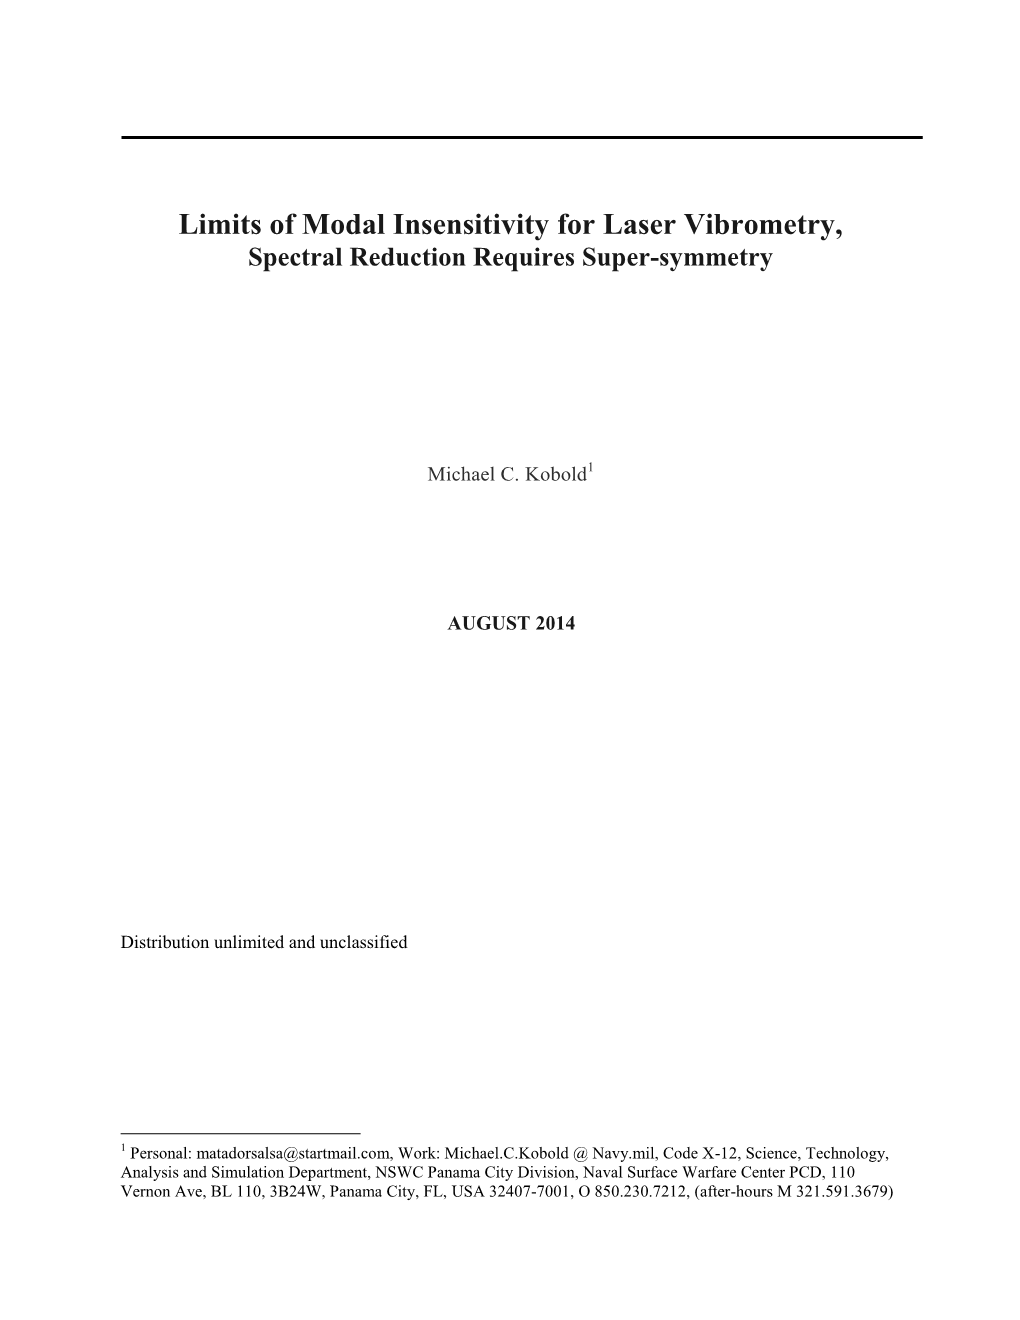 Limits of Modal Insensitivity for Laser Vibrometry, Spectral Reduction Requires Super-Symmetry